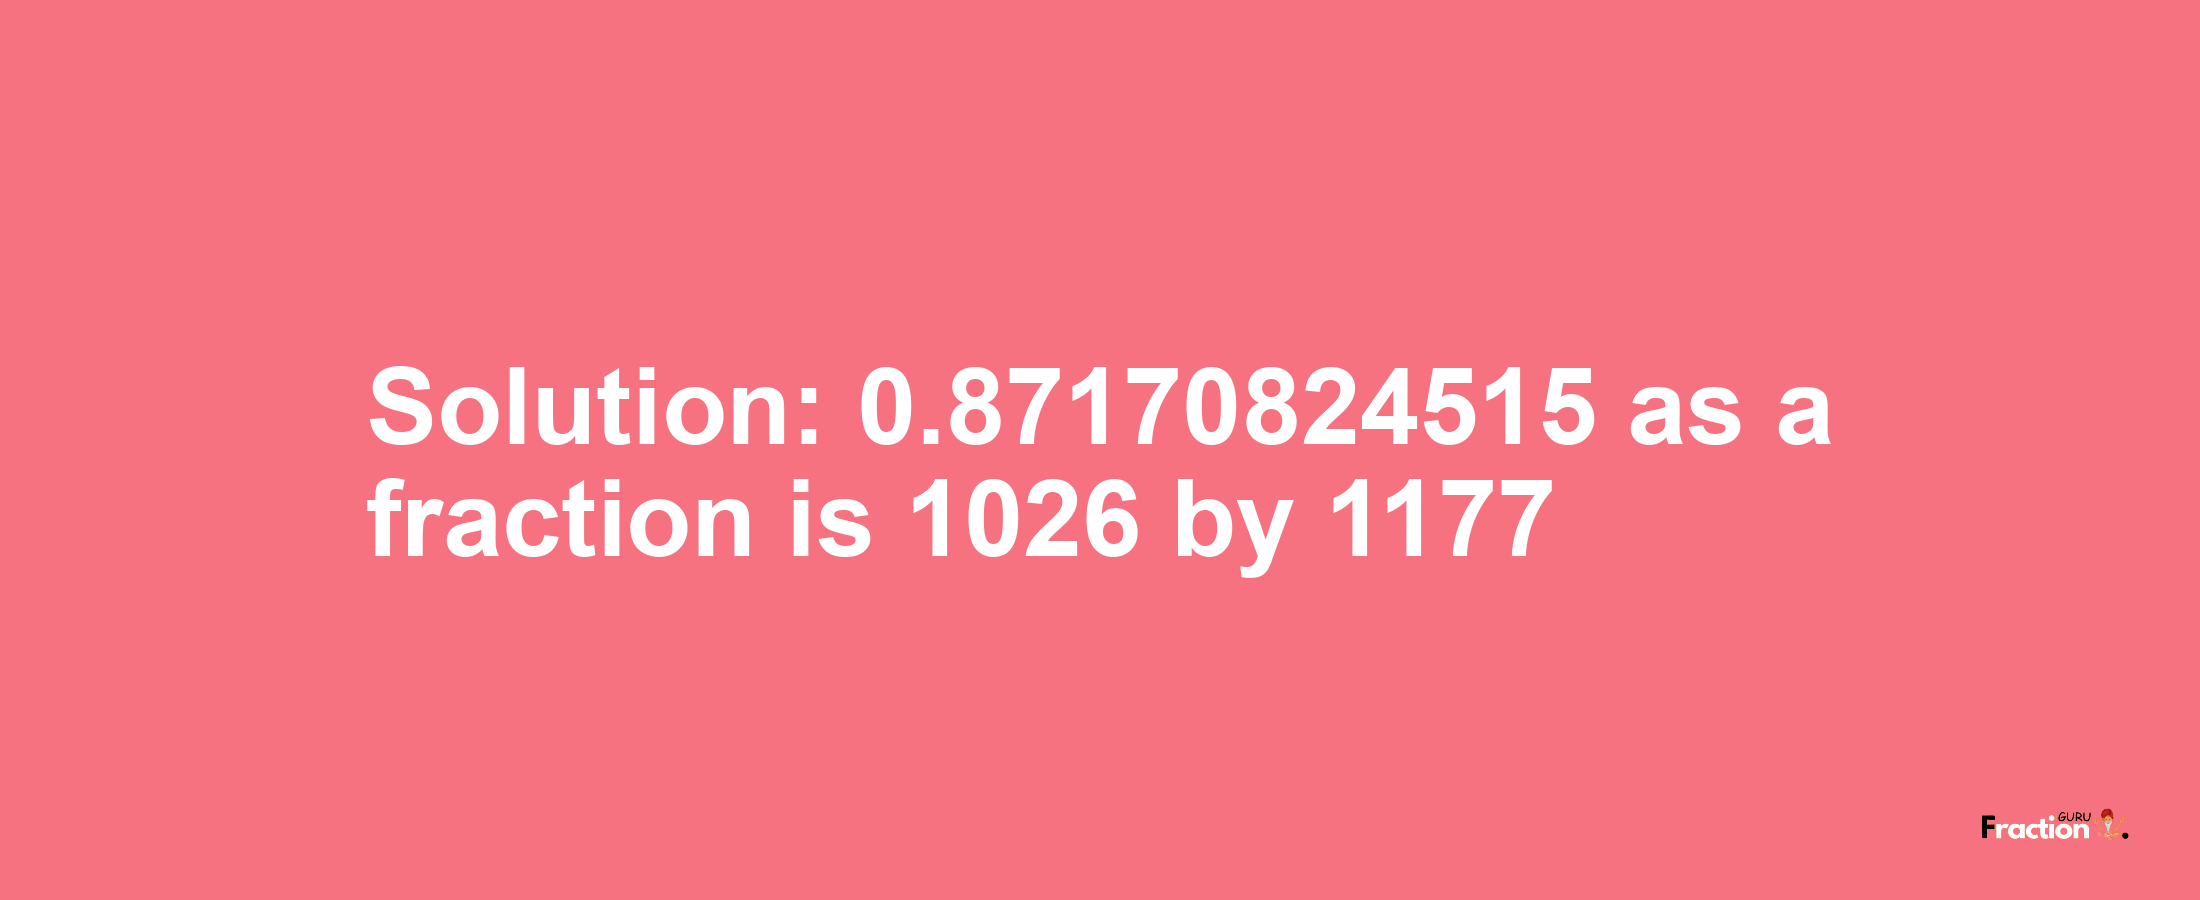 Solution:0.87170824515 as a fraction is 1026/1177